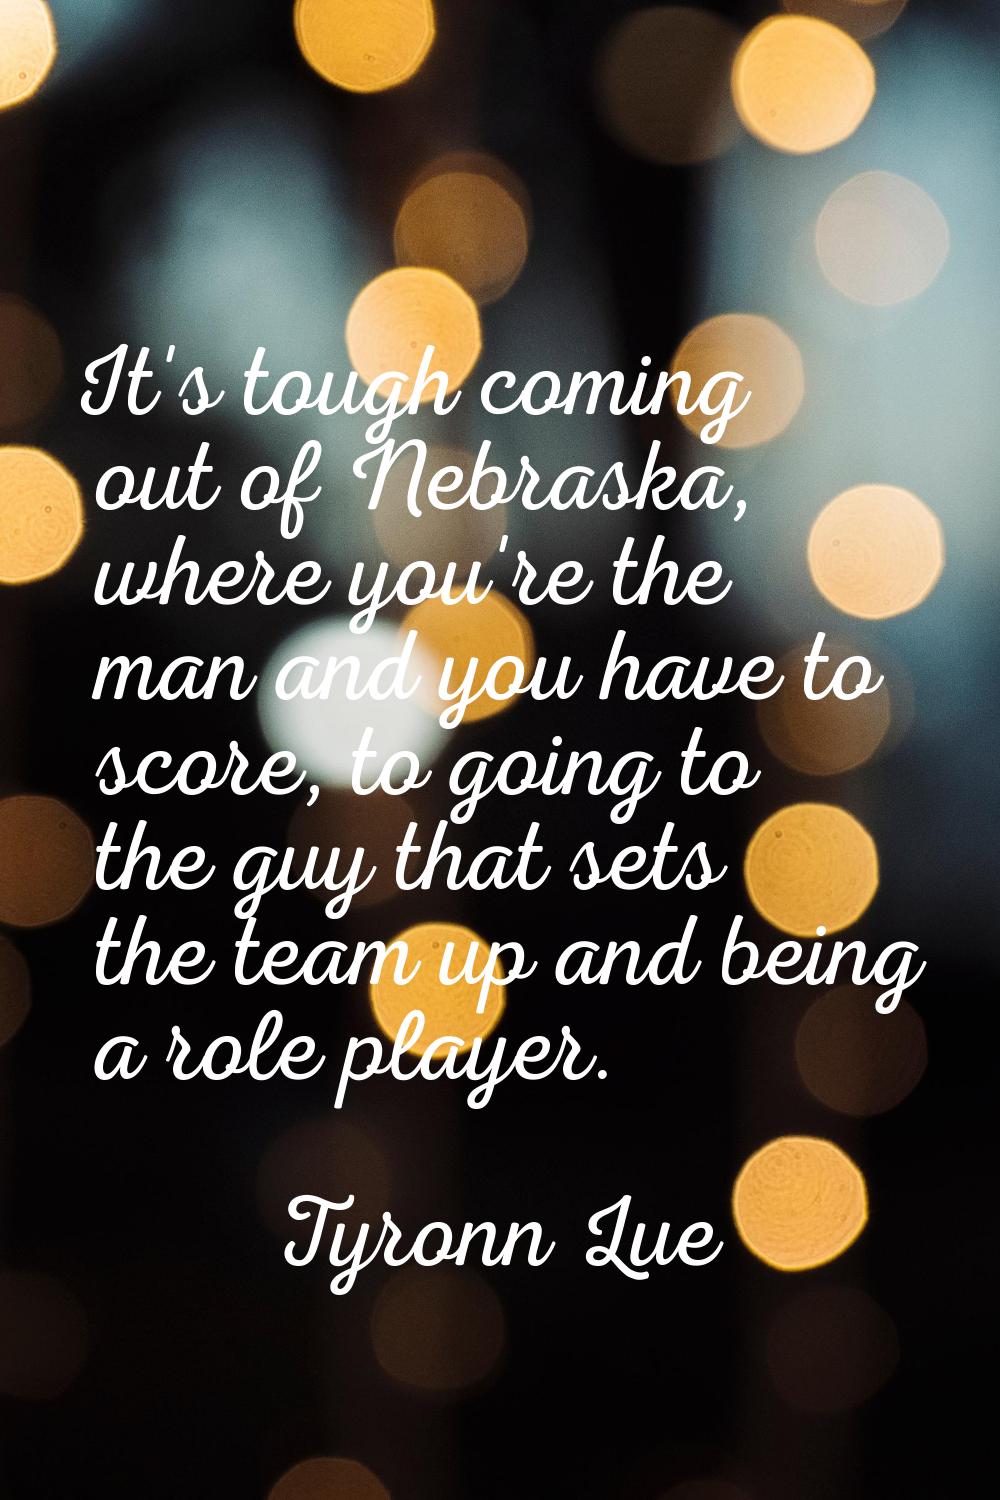 It's tough coming out of Nebraska, where you're the man and you have to score, to going to the guy 